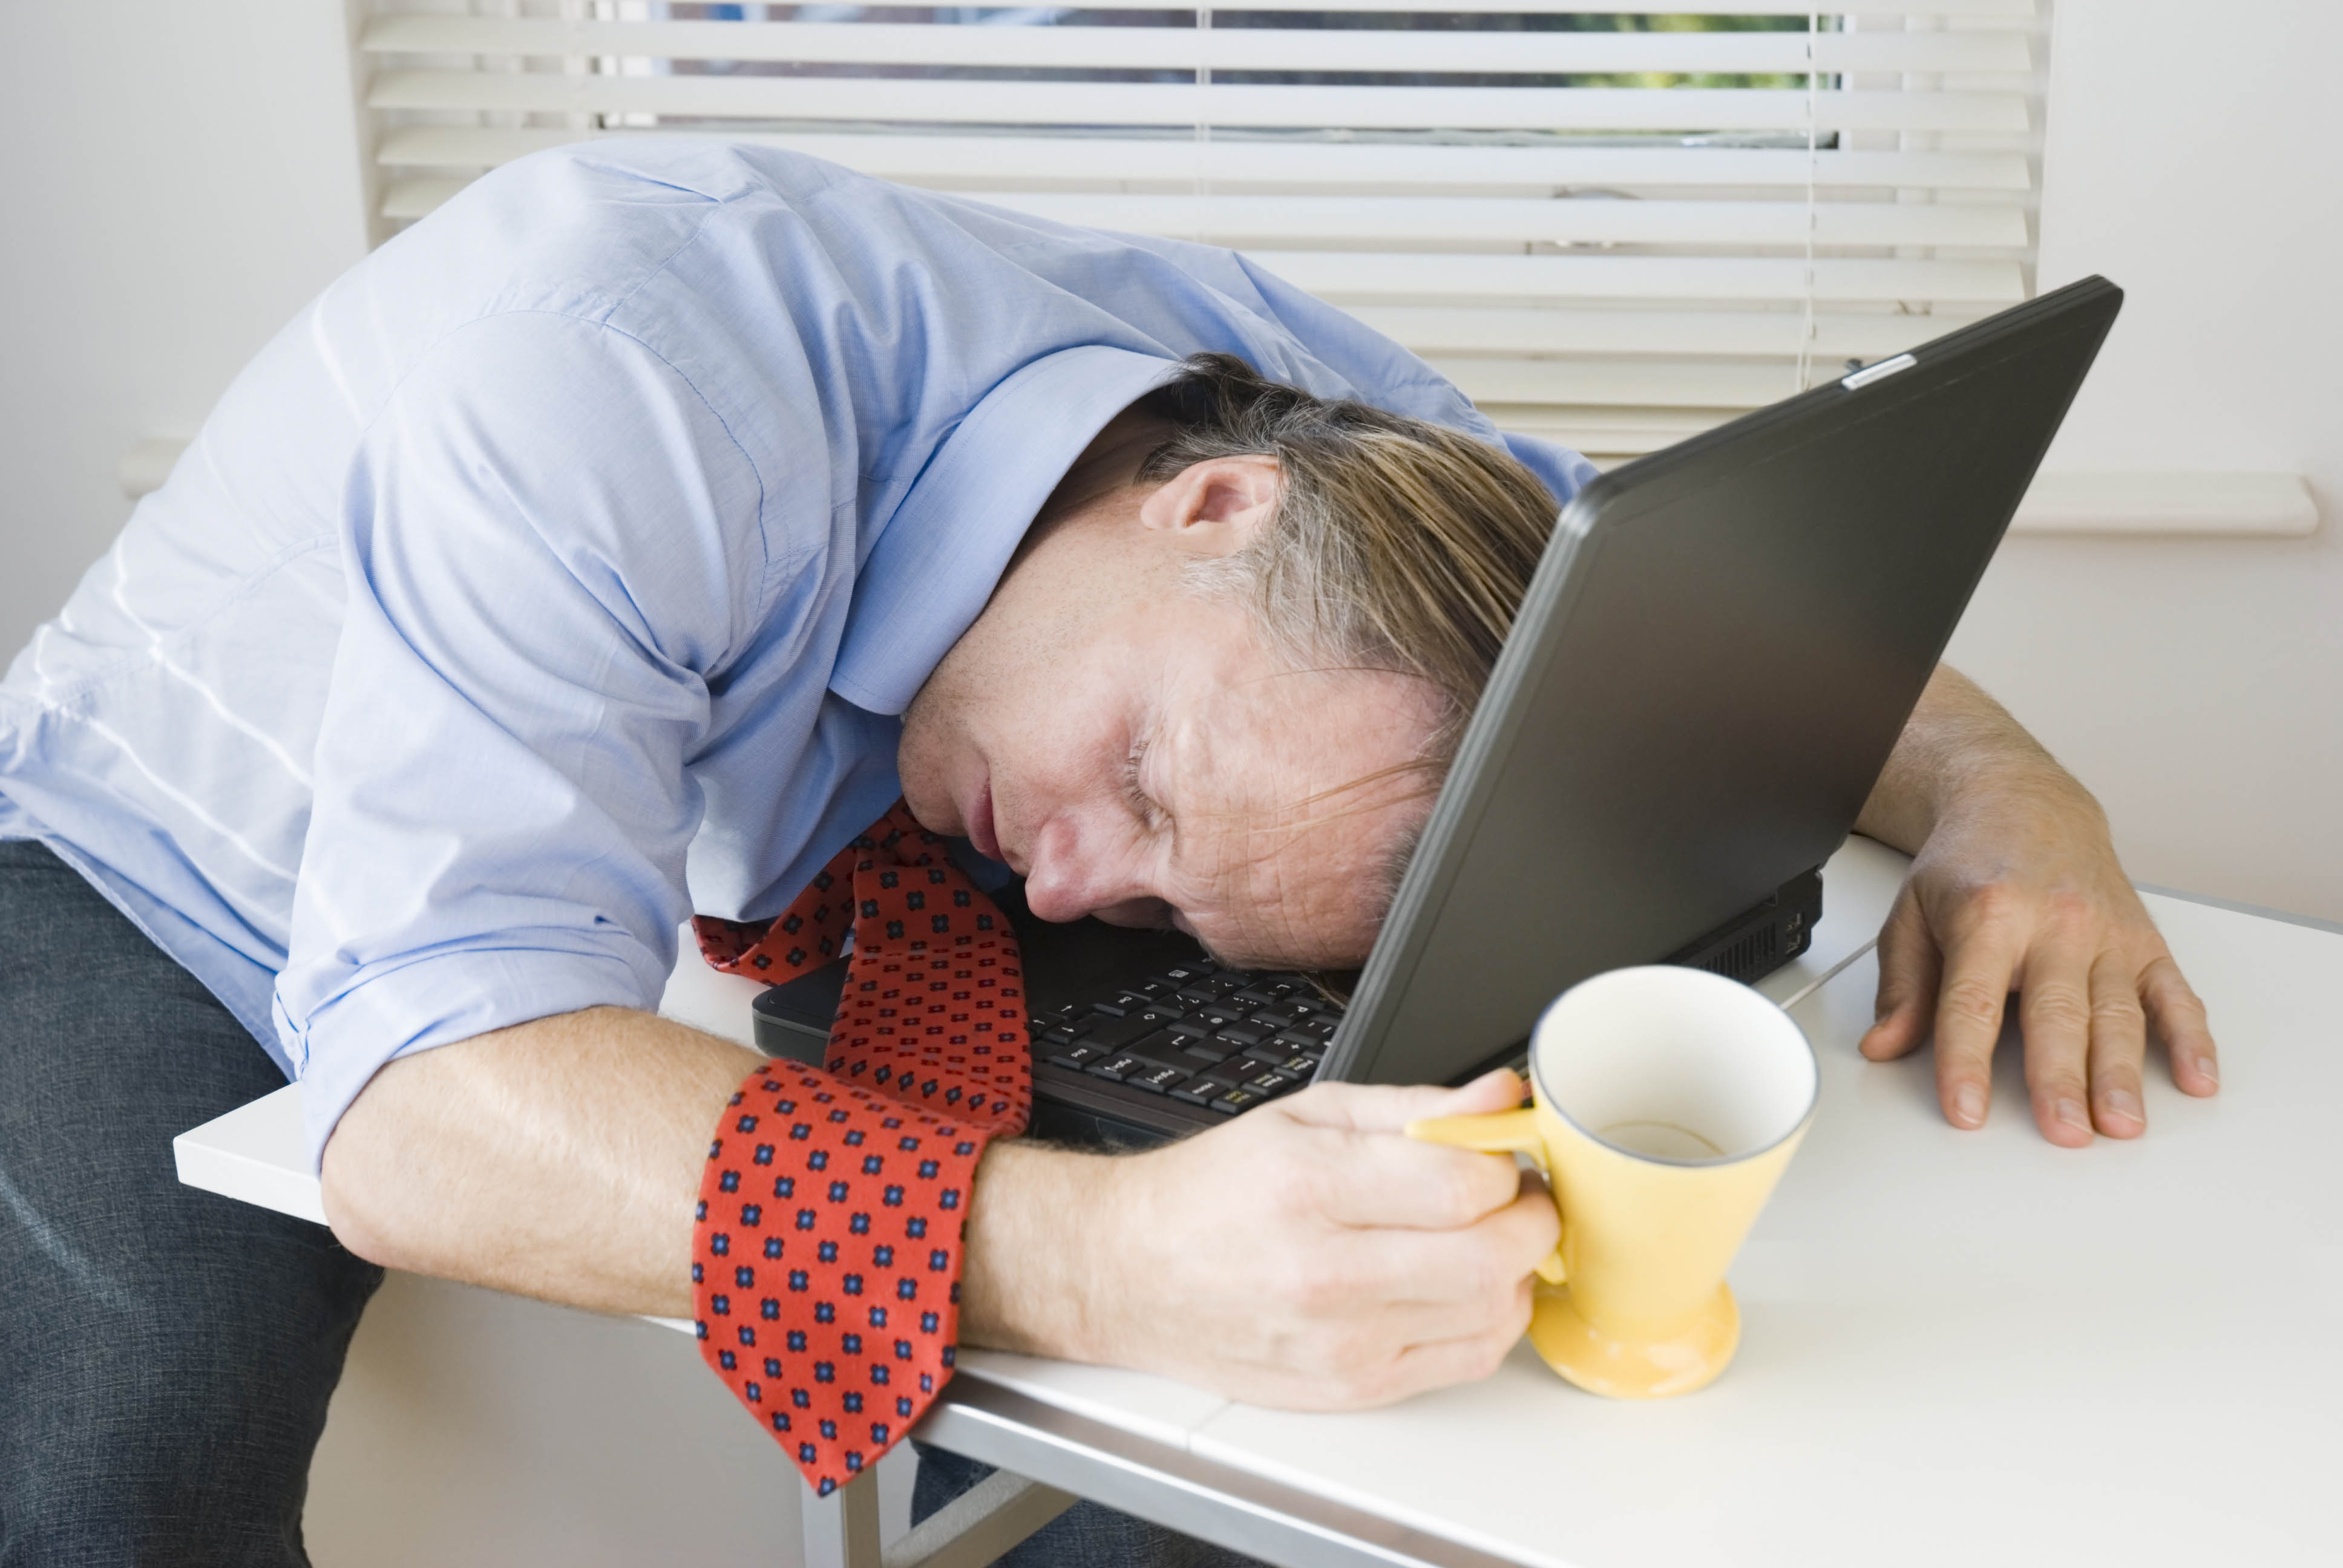 Man in his work clothes, sleeping on his laptop at the table